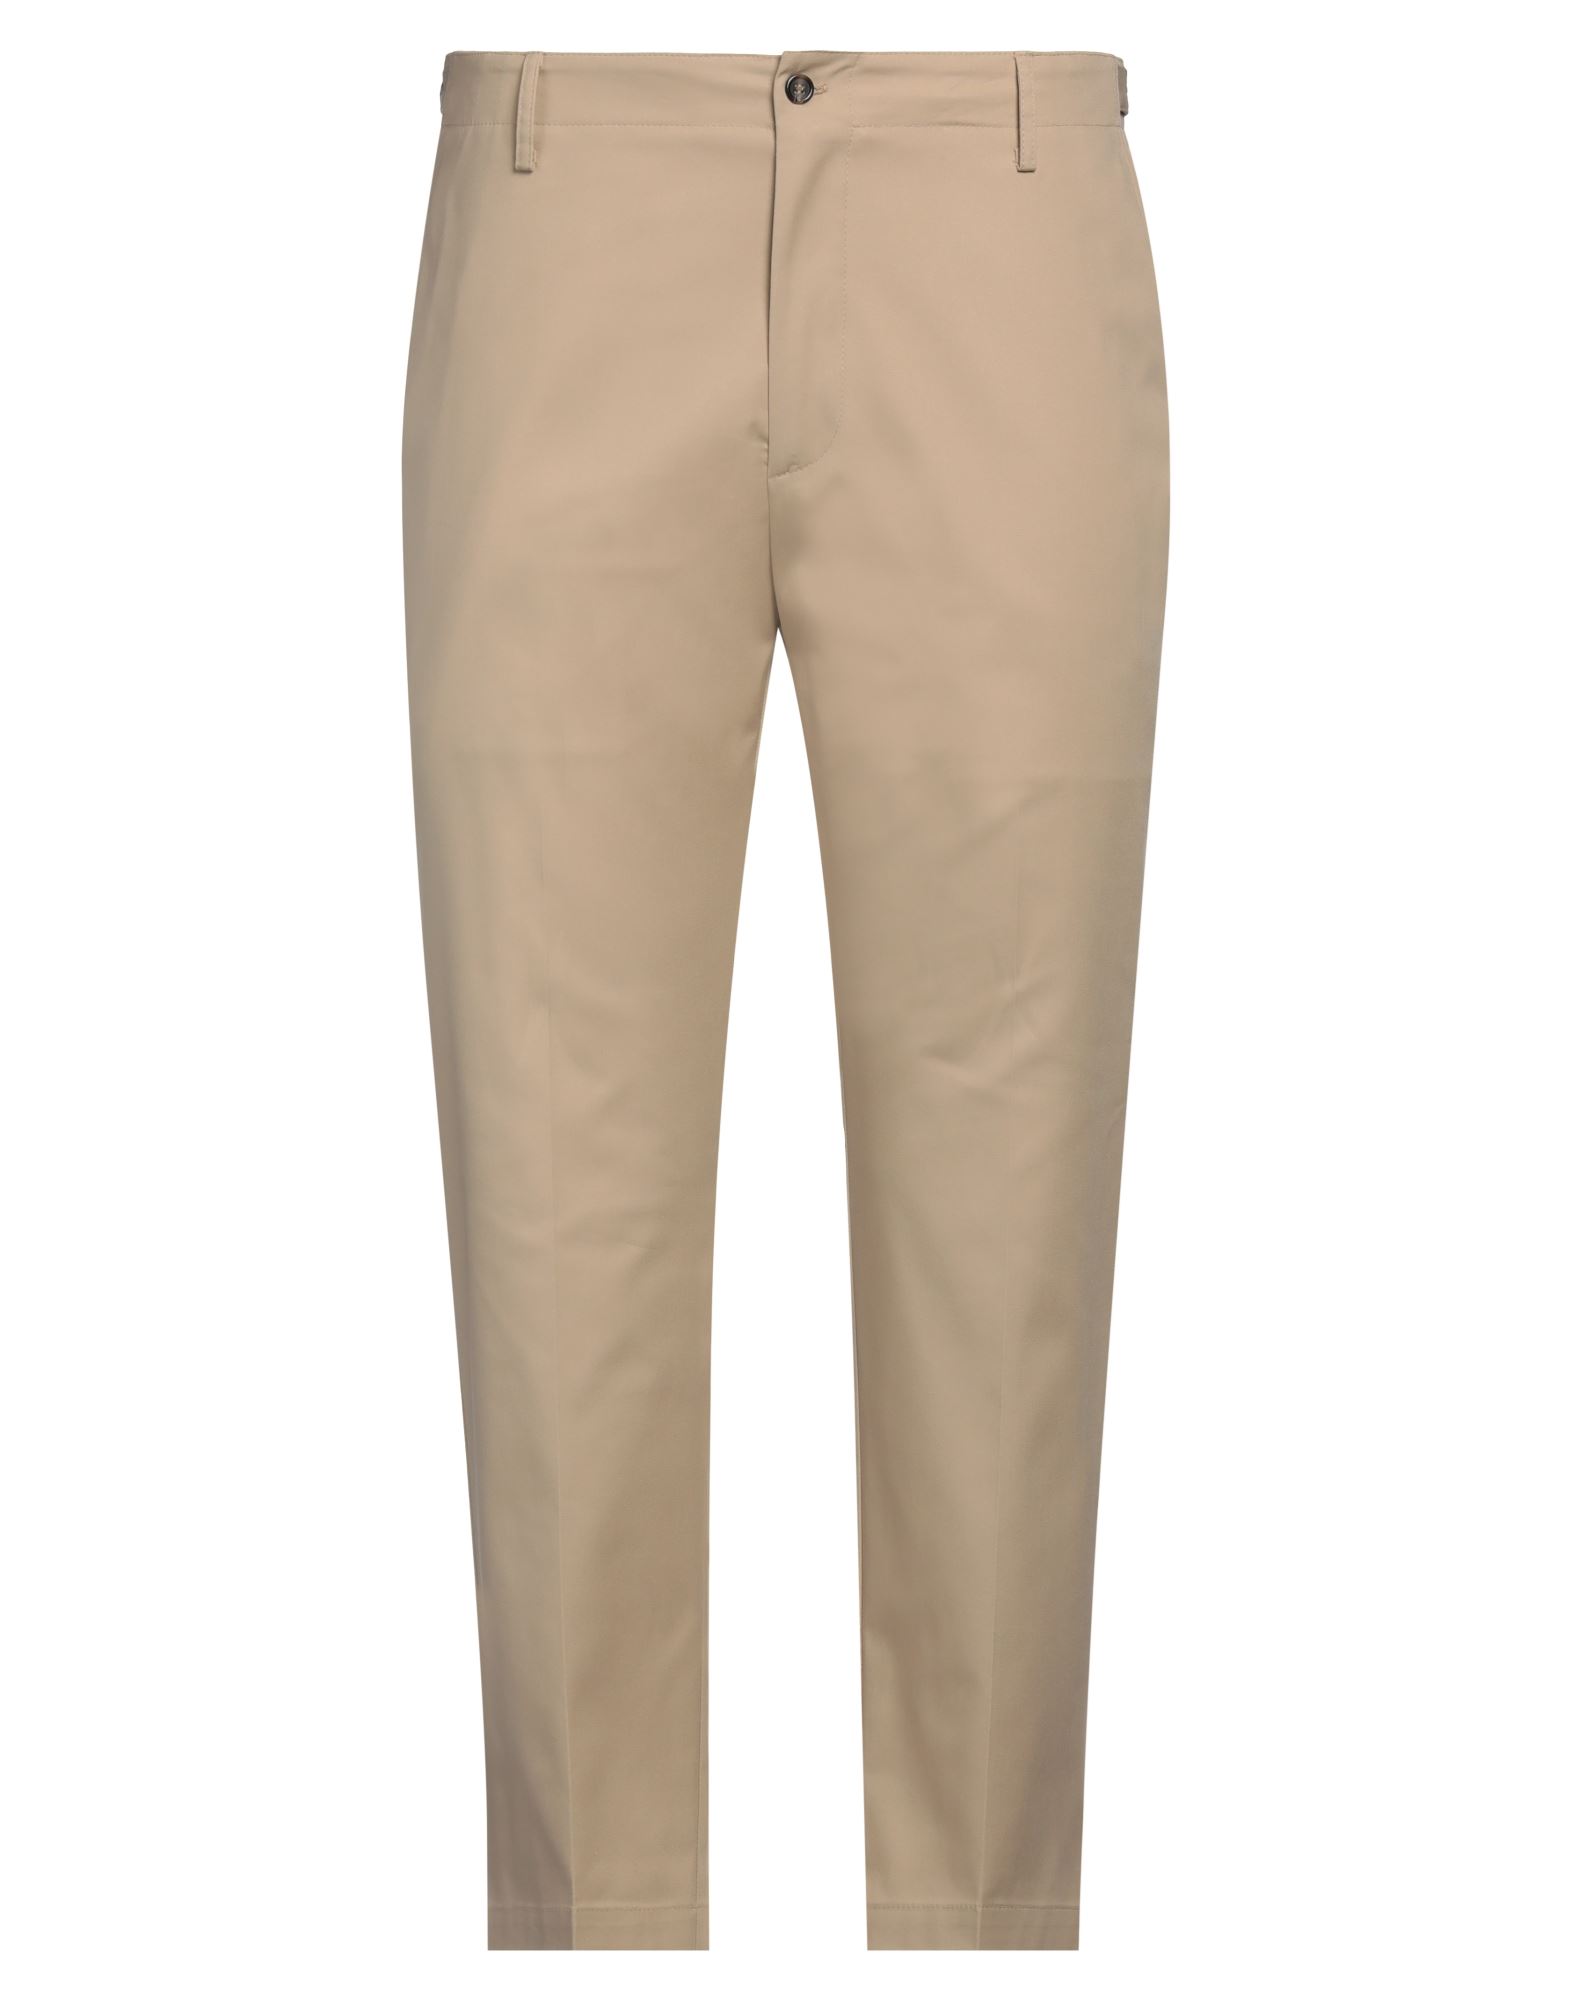 Beaucoup .., Man Pants Sand Size 38 Cotton, Elastane In Beige